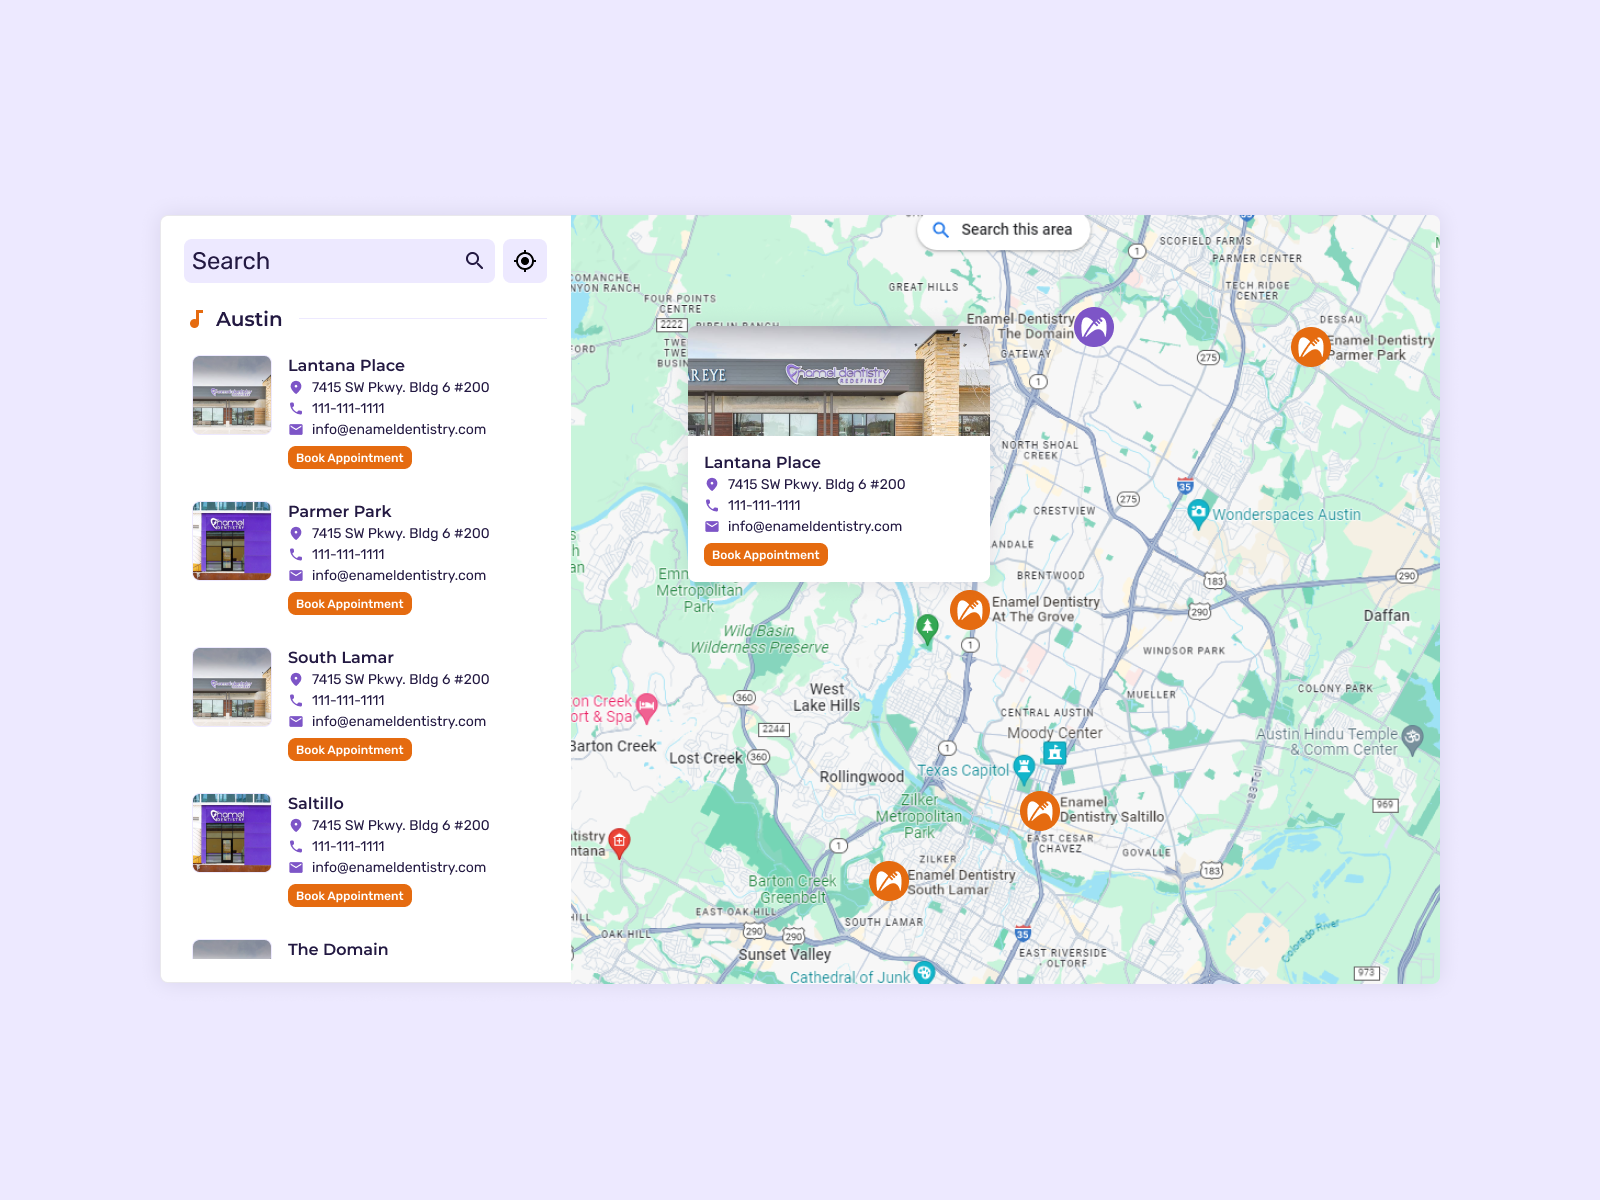 Booking embed integrated with mapbox connected to Webflow CMS for ease of updating